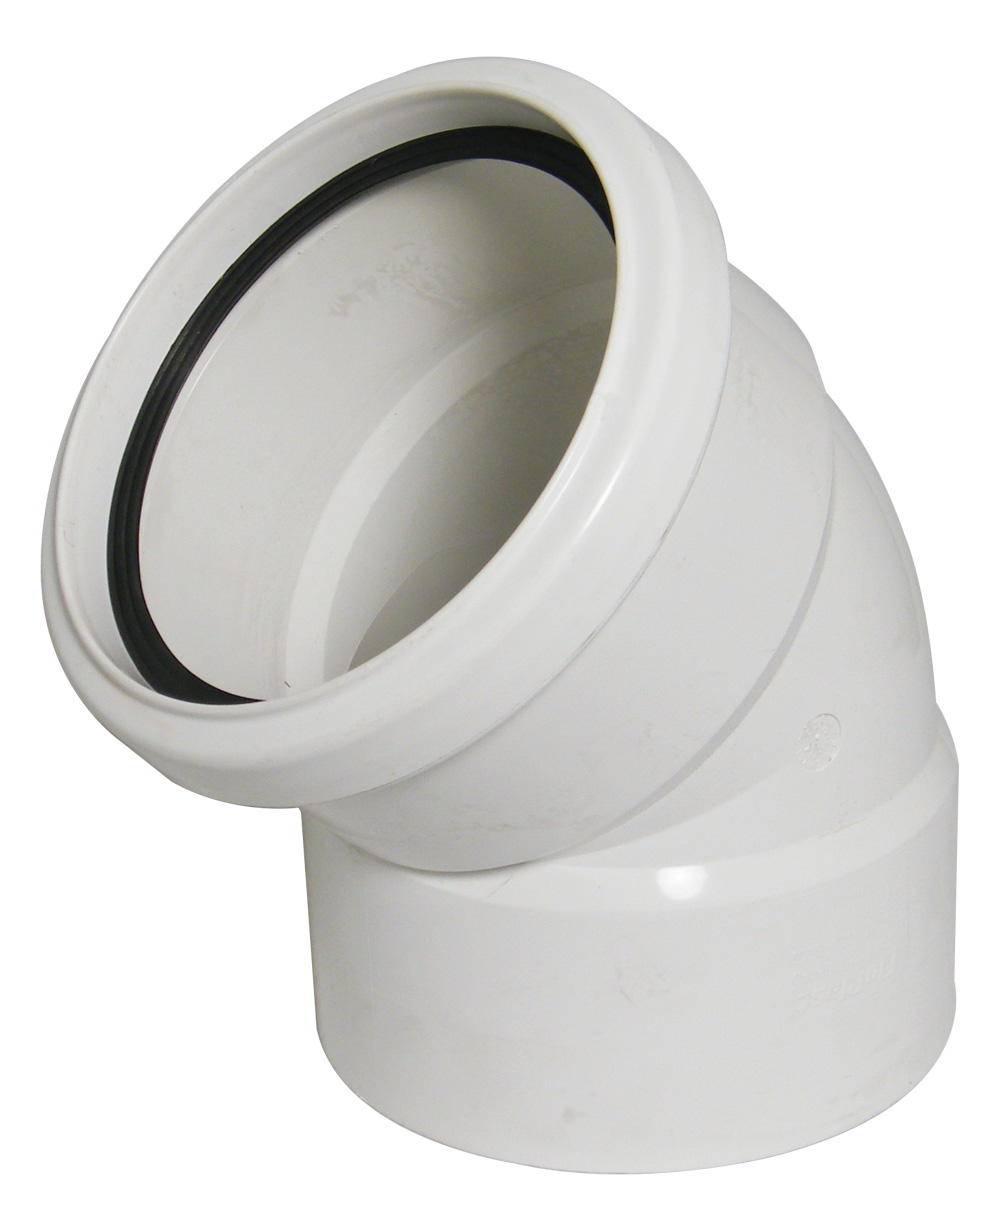 Floplast SP440WH 110mm/4 Inch Ring Seal Soil System - 135 Degree Offset Bend Double Socket - White